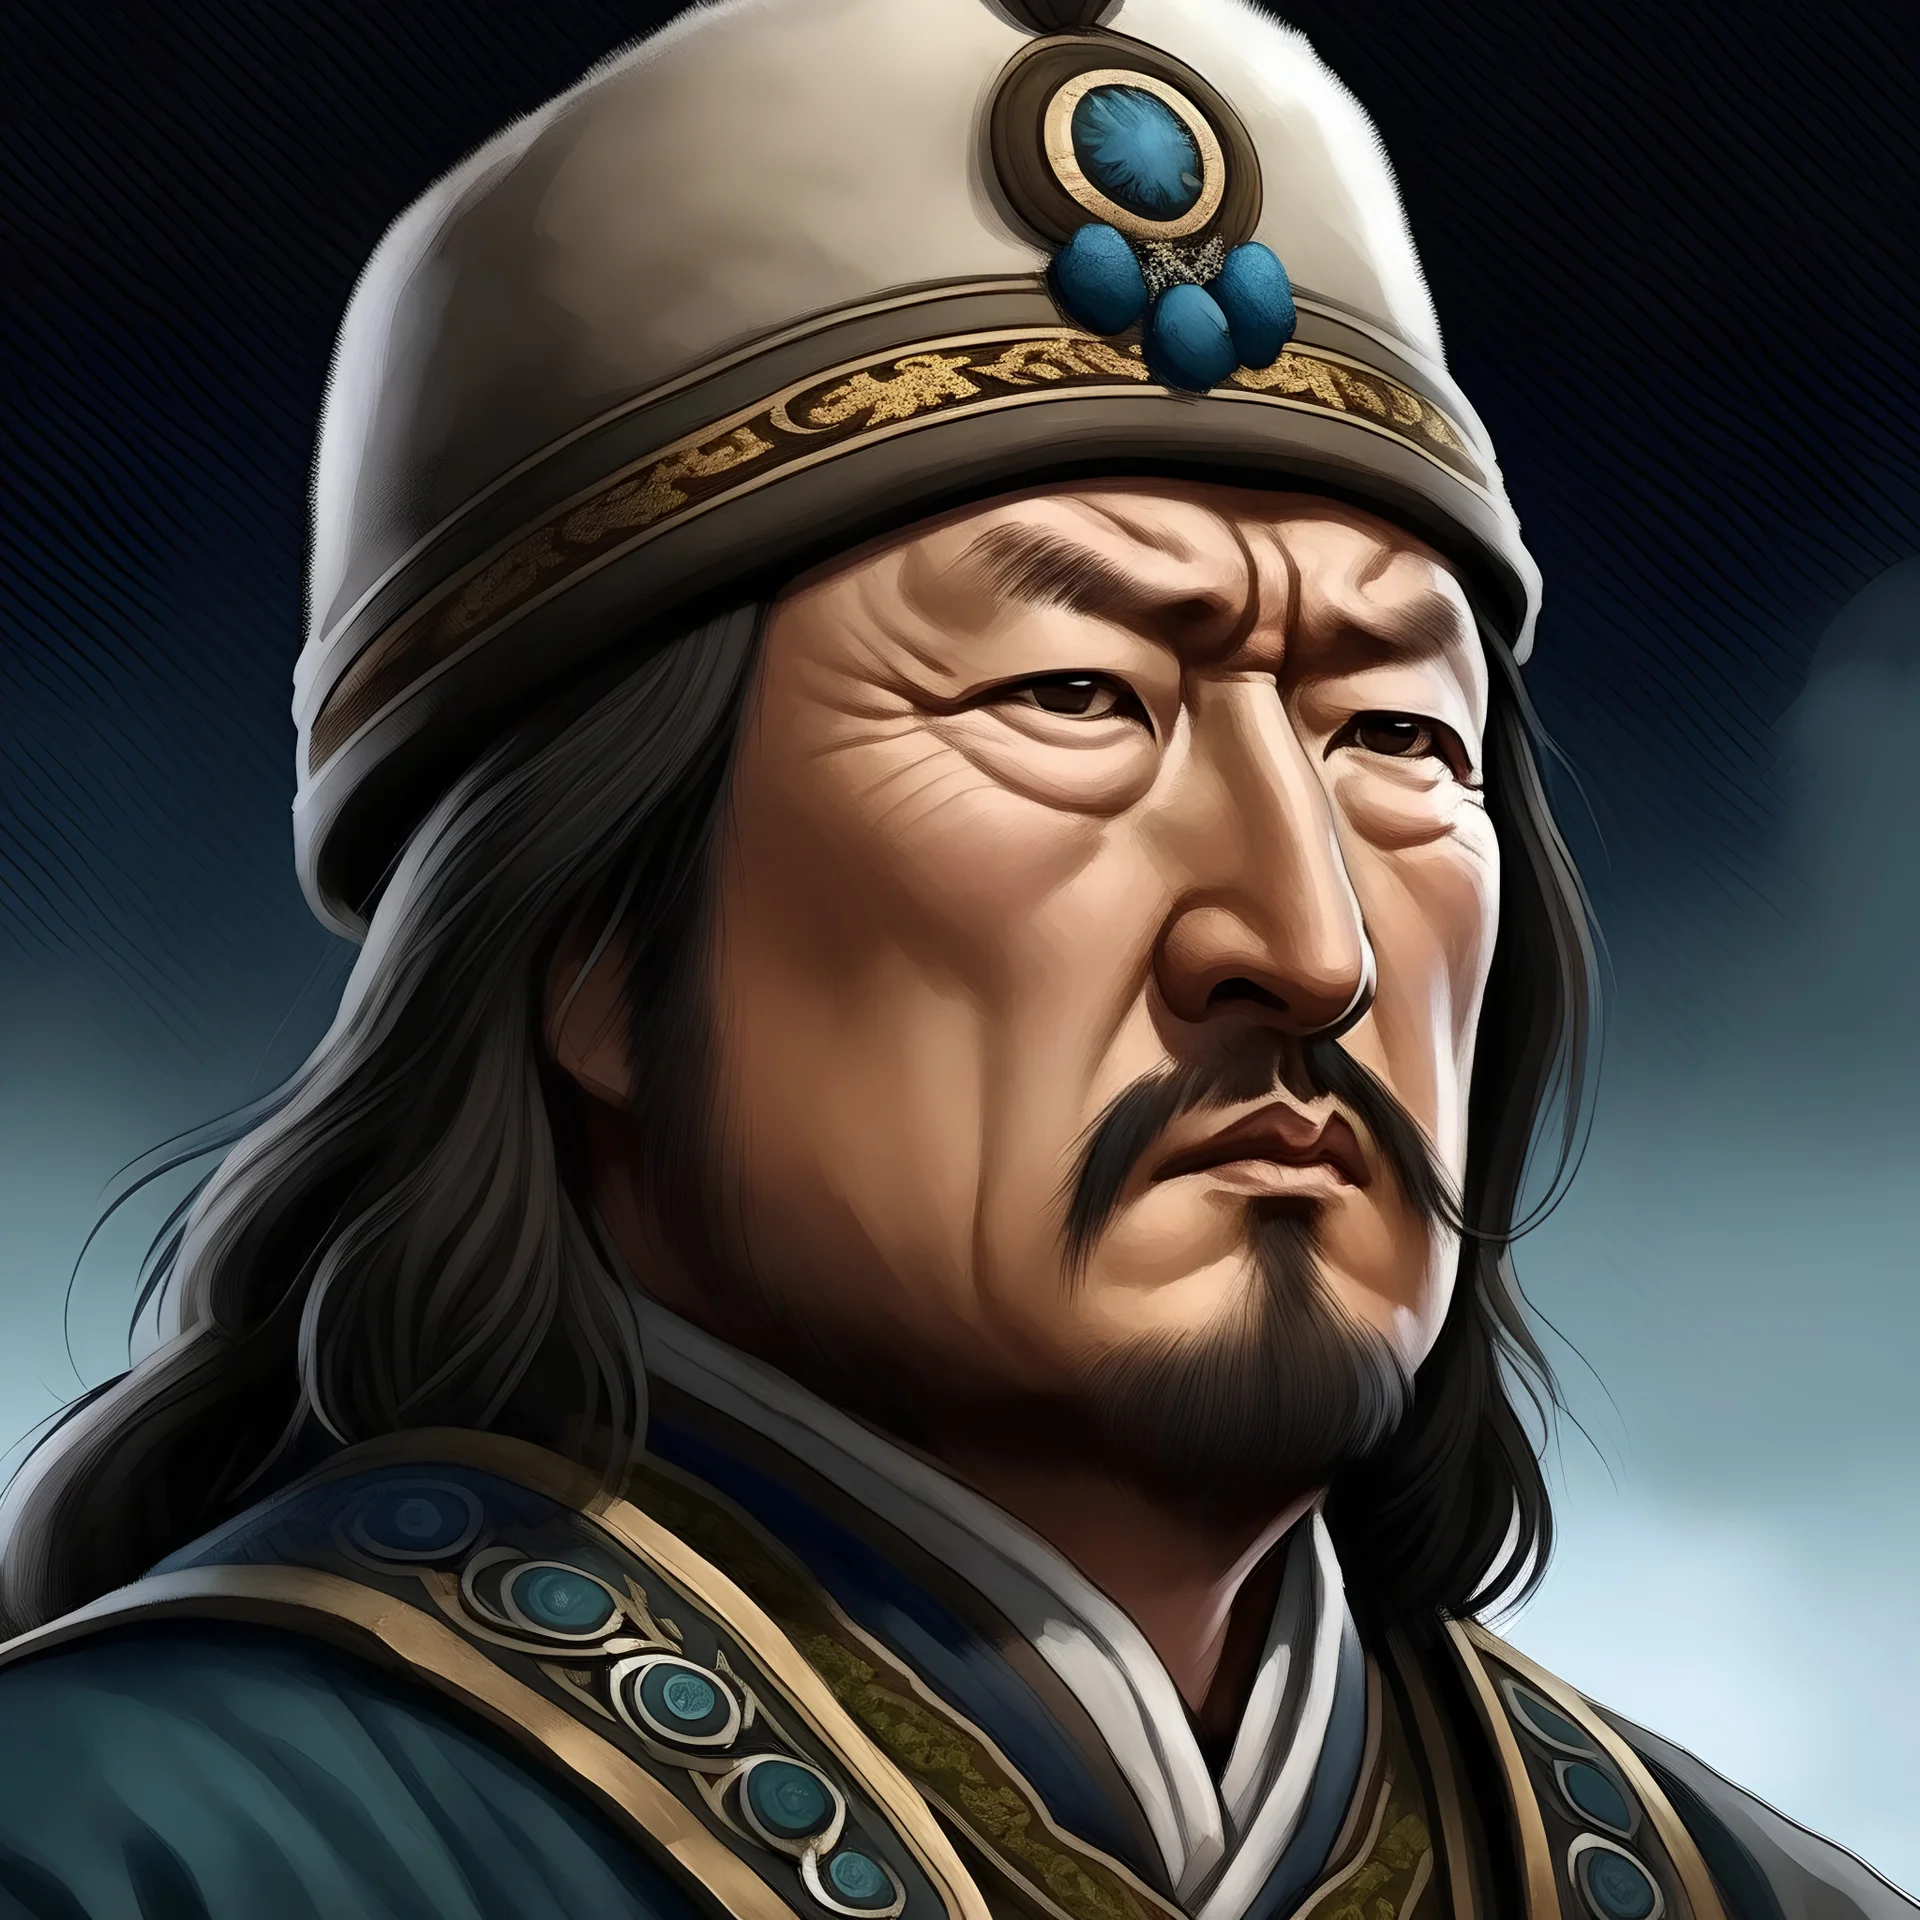 Genghis Khan profile picture